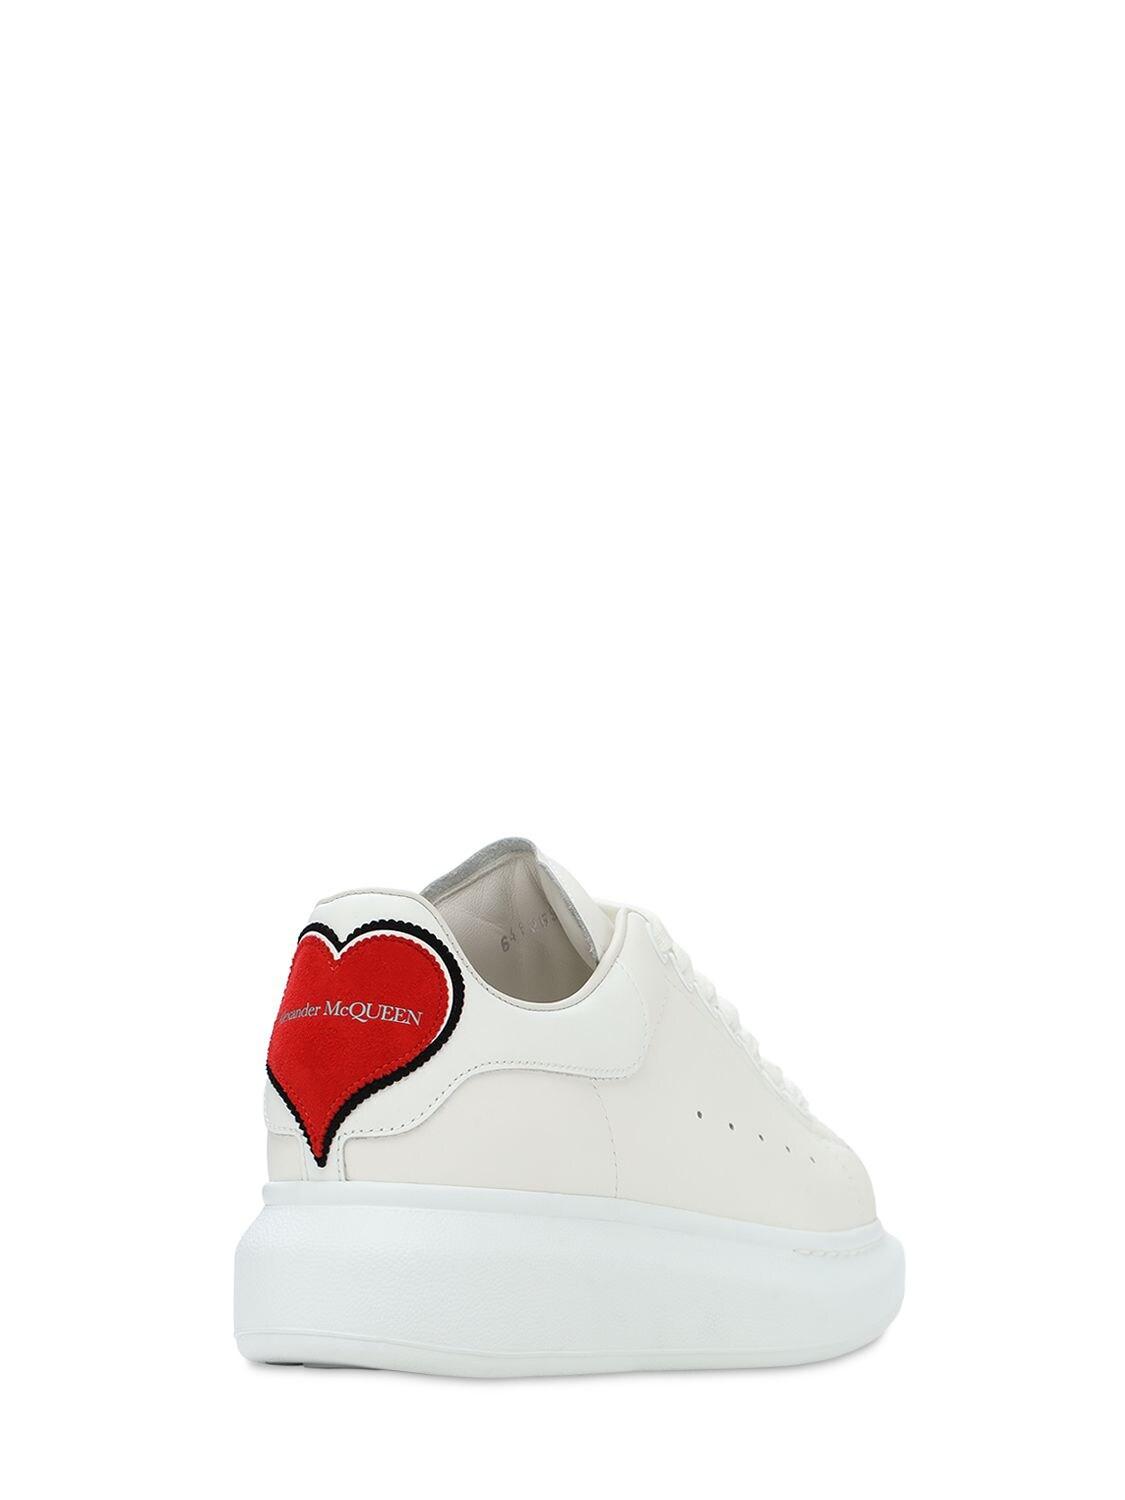 Alexander McQueen 45mm Heart Patch Leather Sneakers in White | Lyst